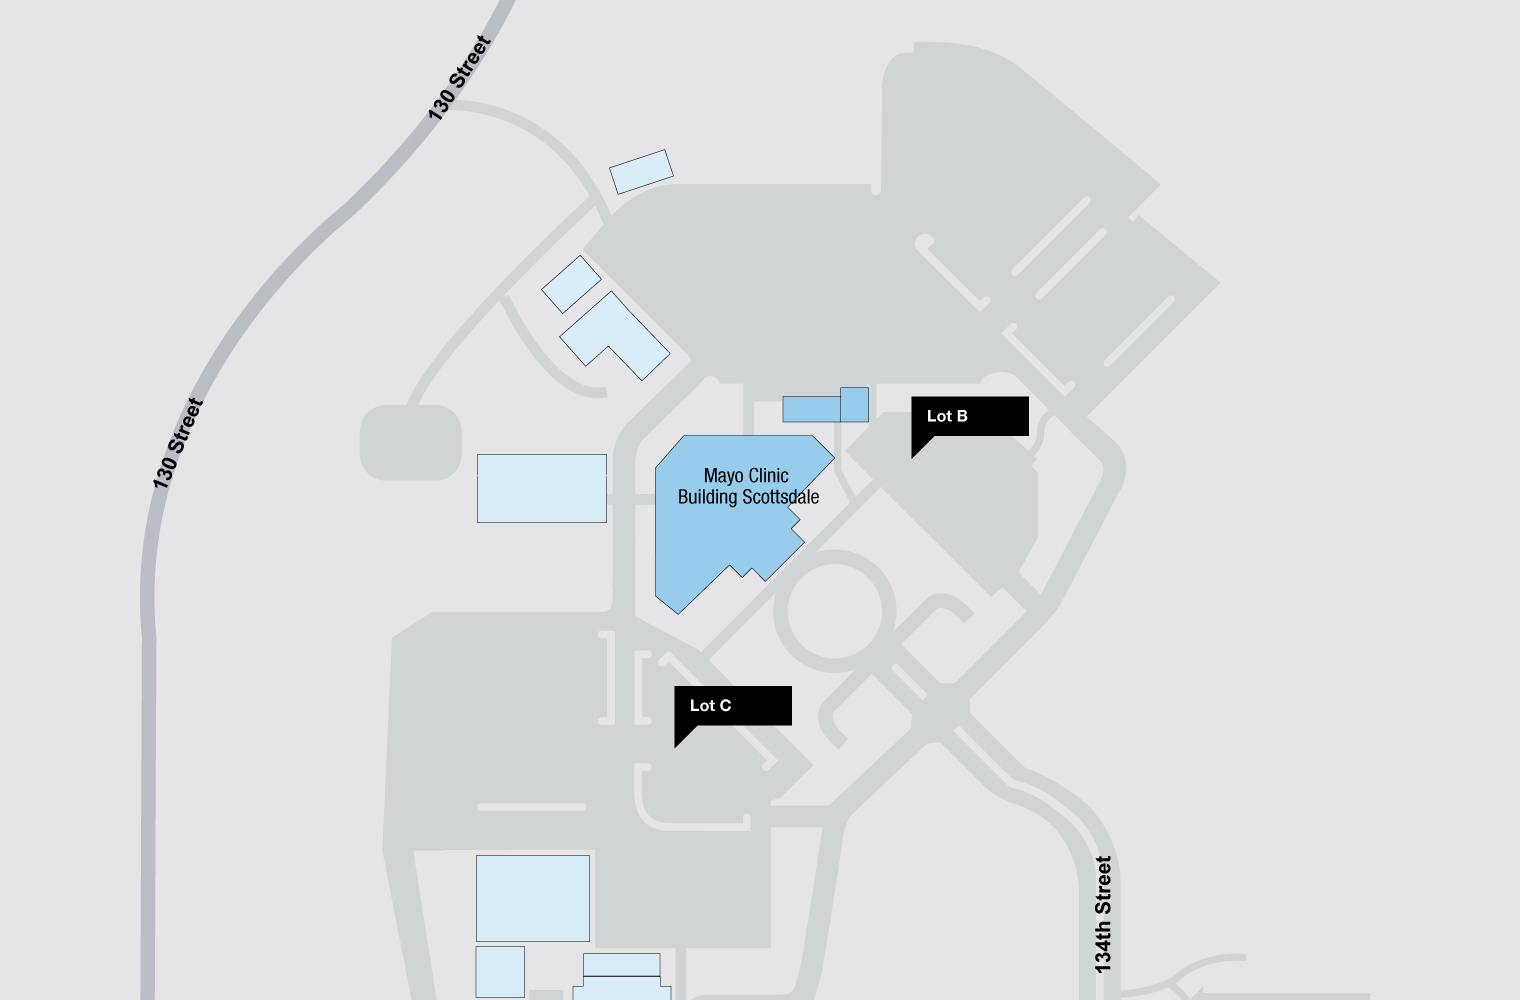 Parking map for Scottsdale campus of Mayo Clinic